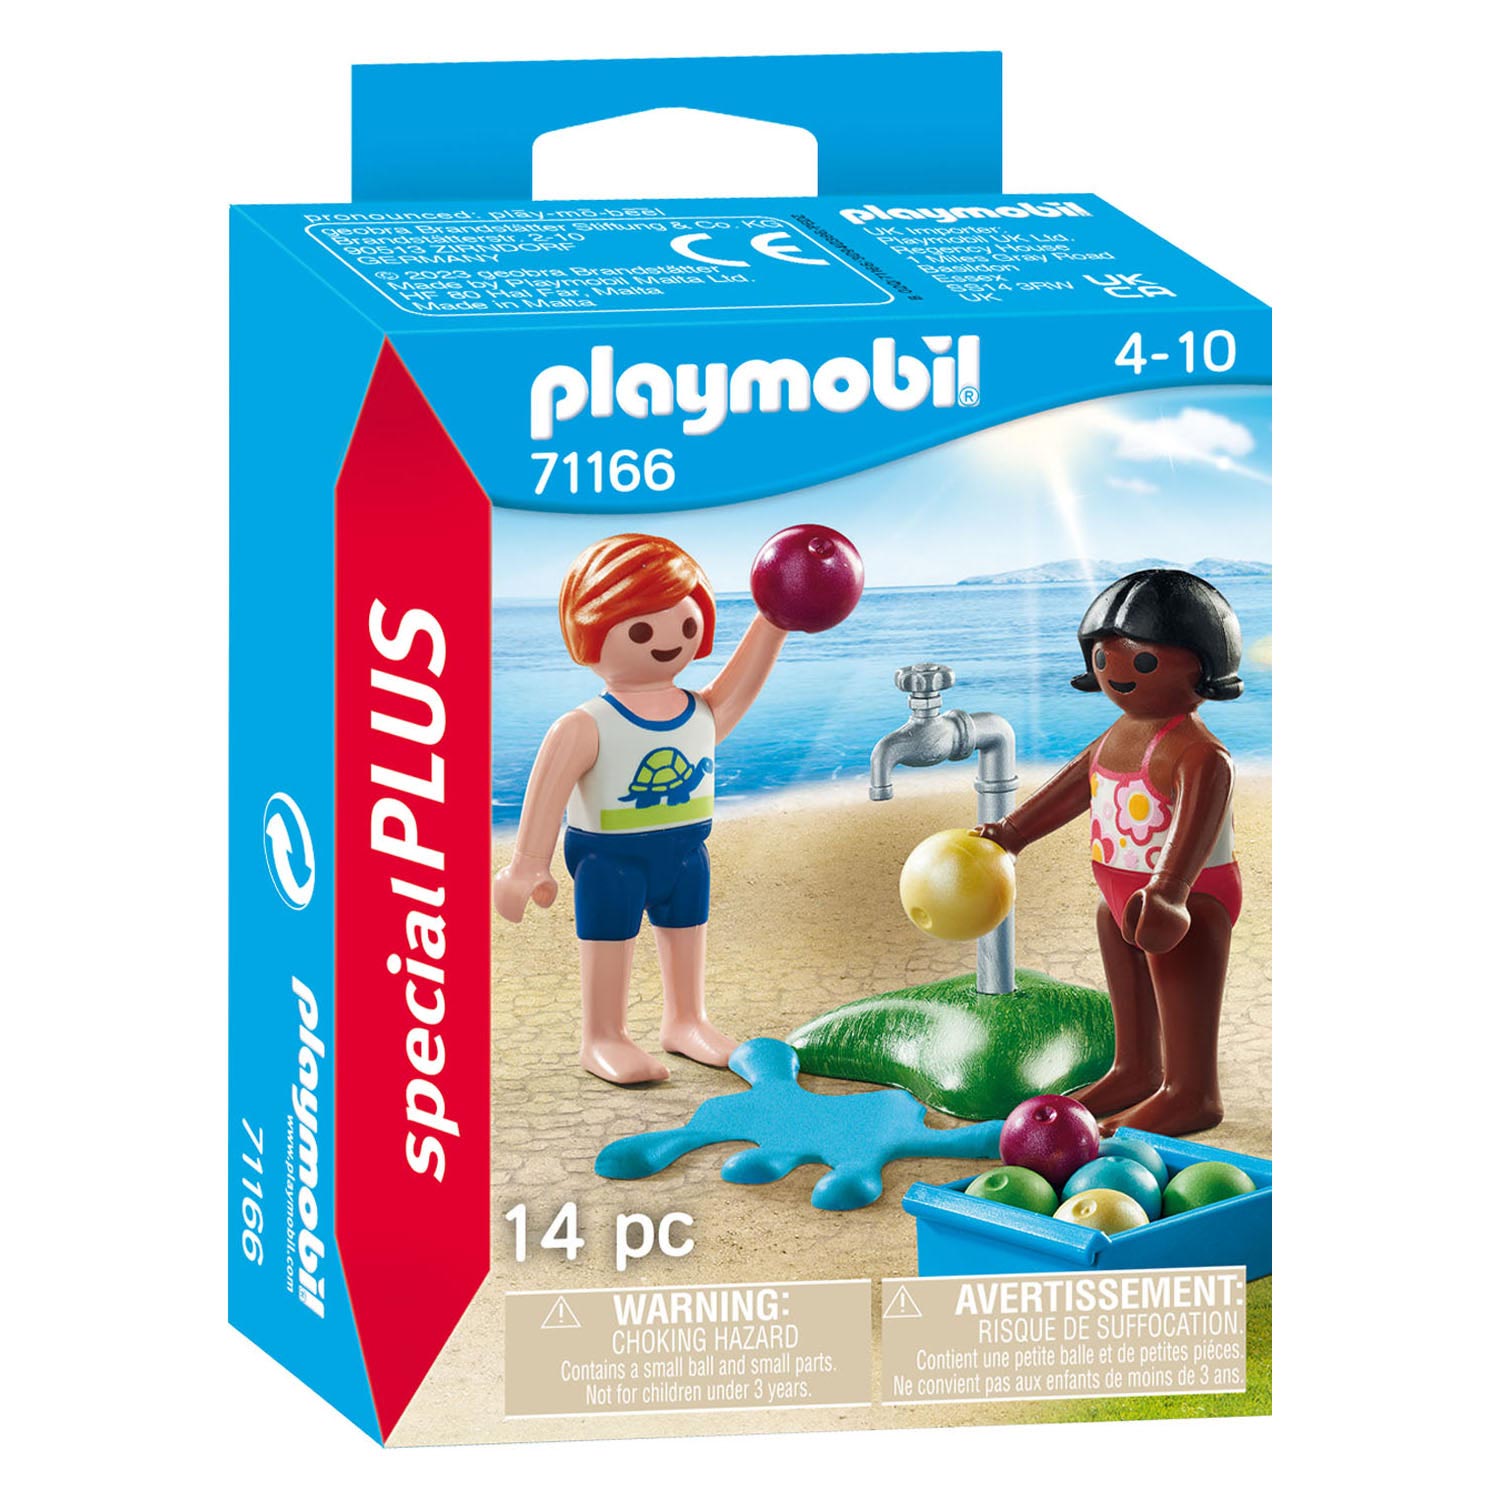 Playmobil Special Plus Soccer Player With Goal Building Set 70875 